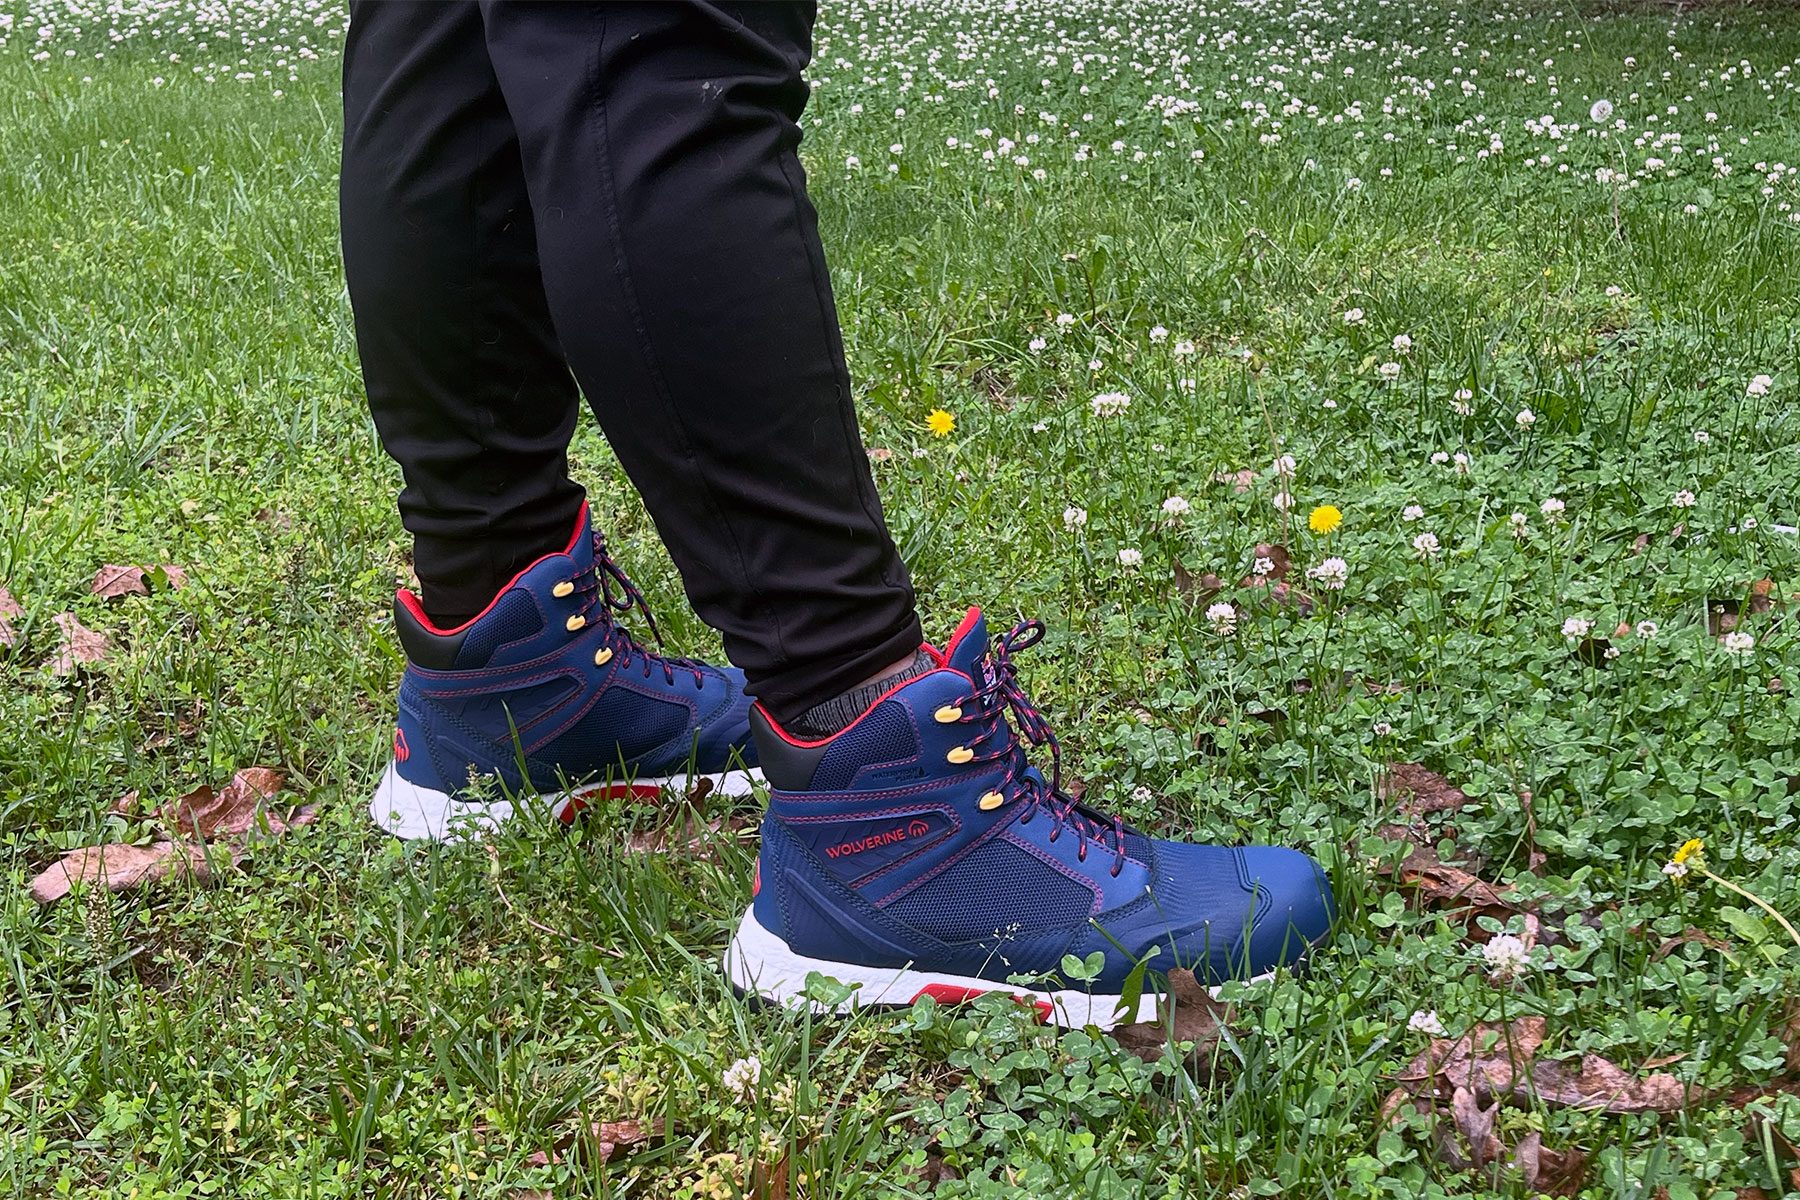 Wearing Wolverine Hiking Boots Get A Red Bull Themed Makeover and standing over grass ground